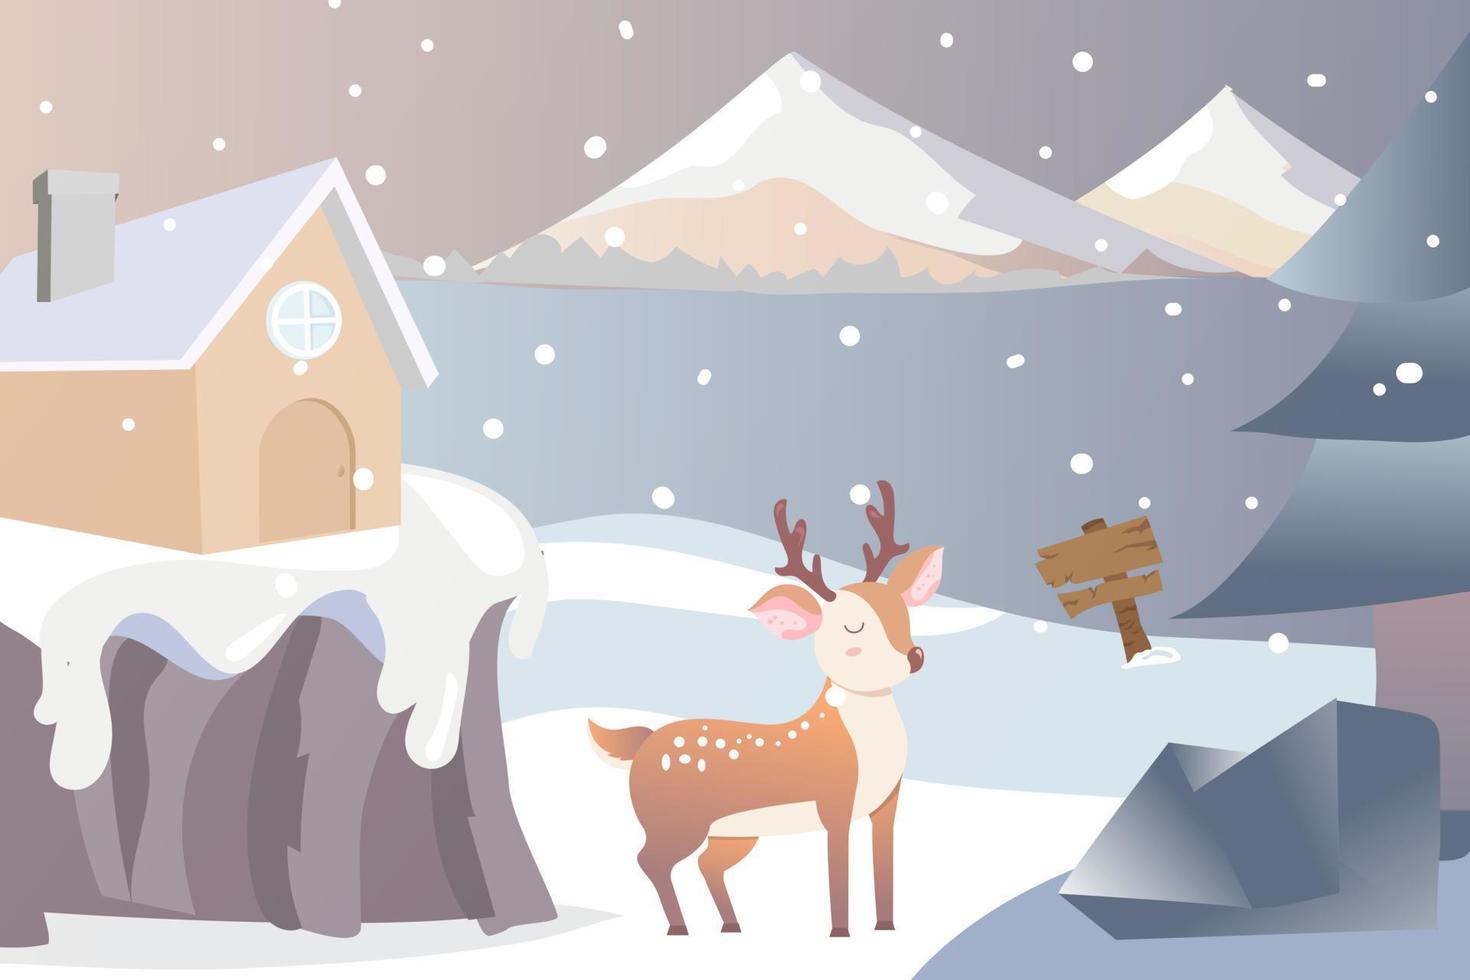 Merry Christmas Winter on mountain background vector